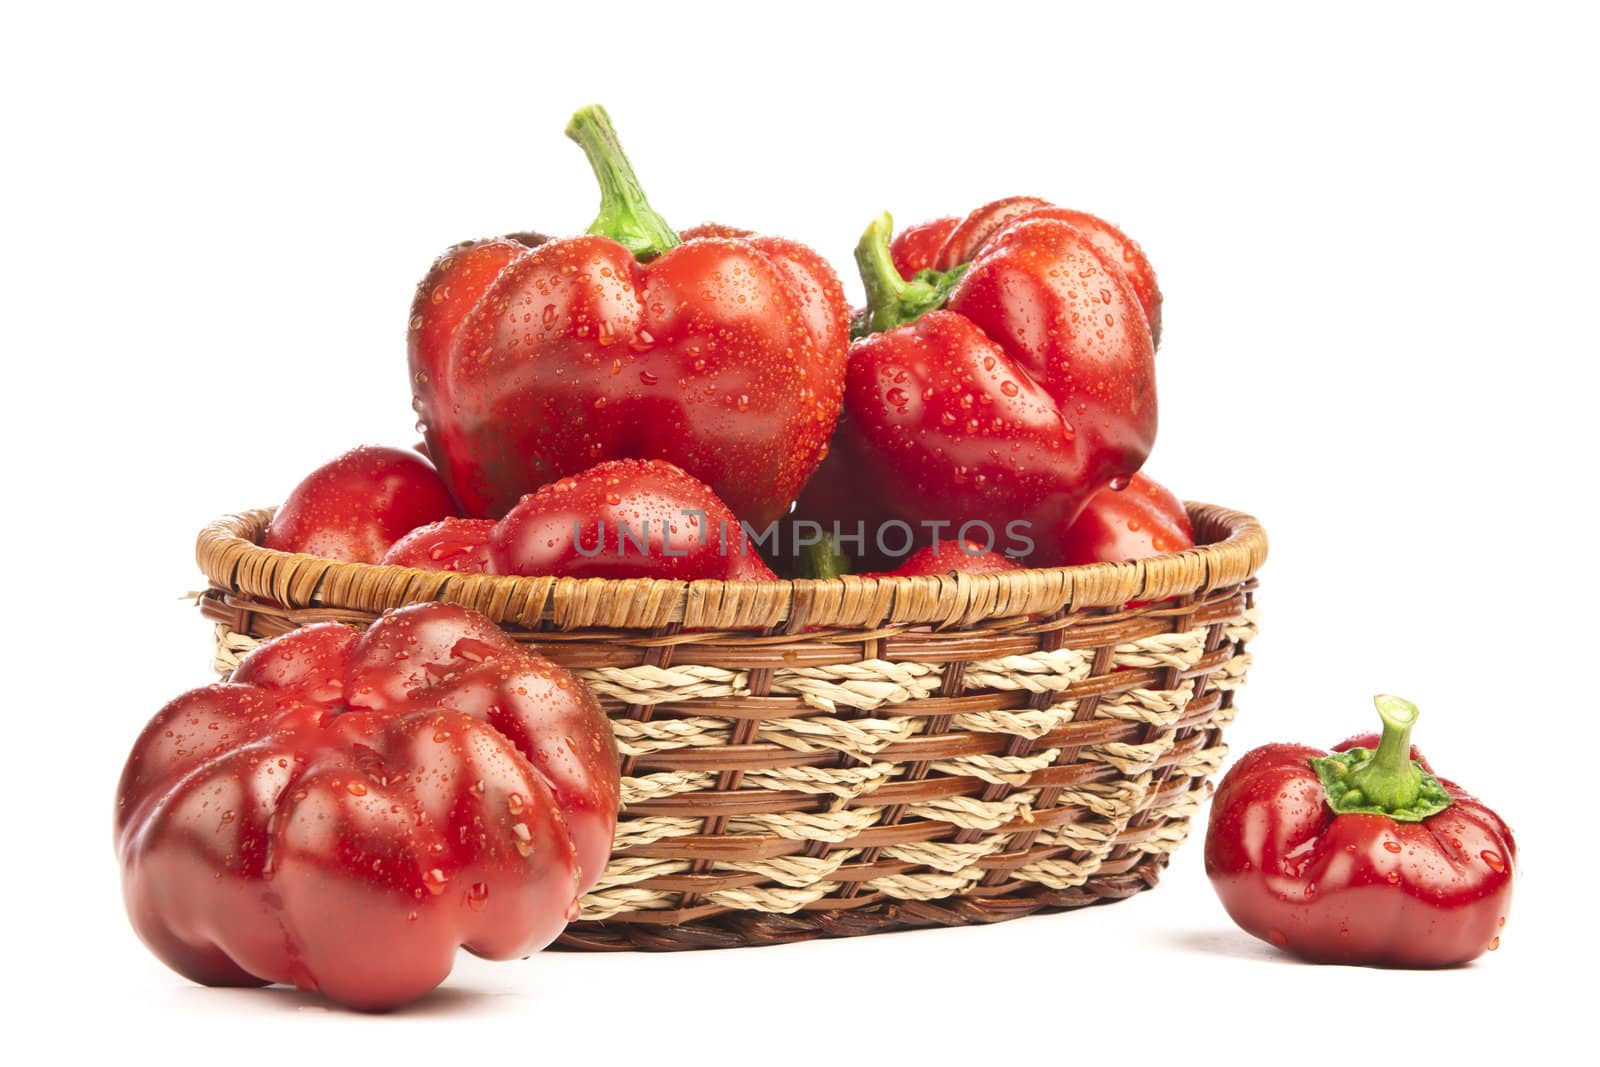 Red pepper in basket on white background